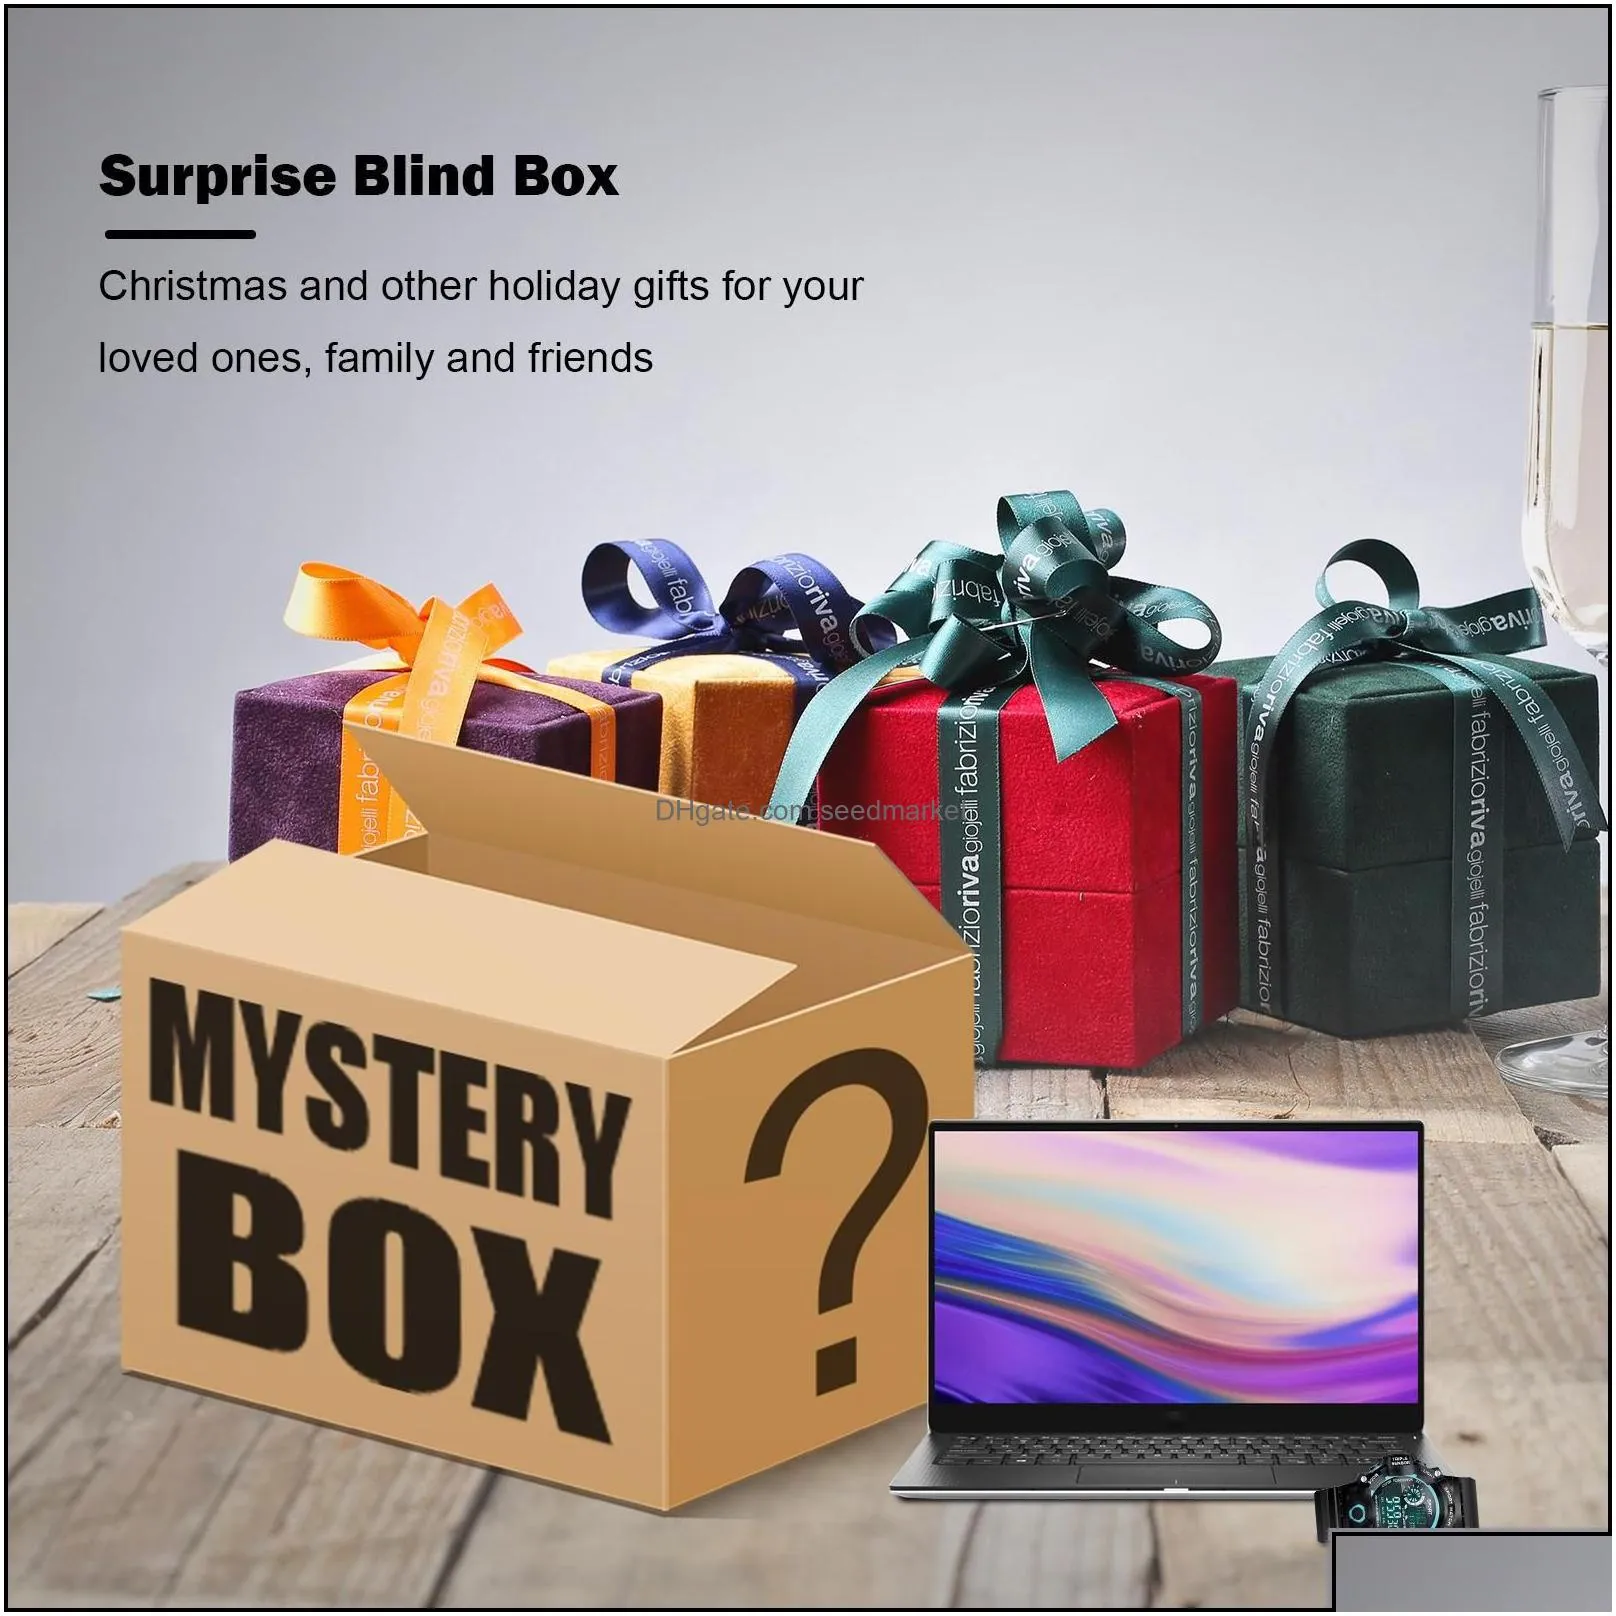 2023 2023 party favor mystery box electronics boxes random birthday surprise favors lucky for adts gift such as drones smart watches-c dr